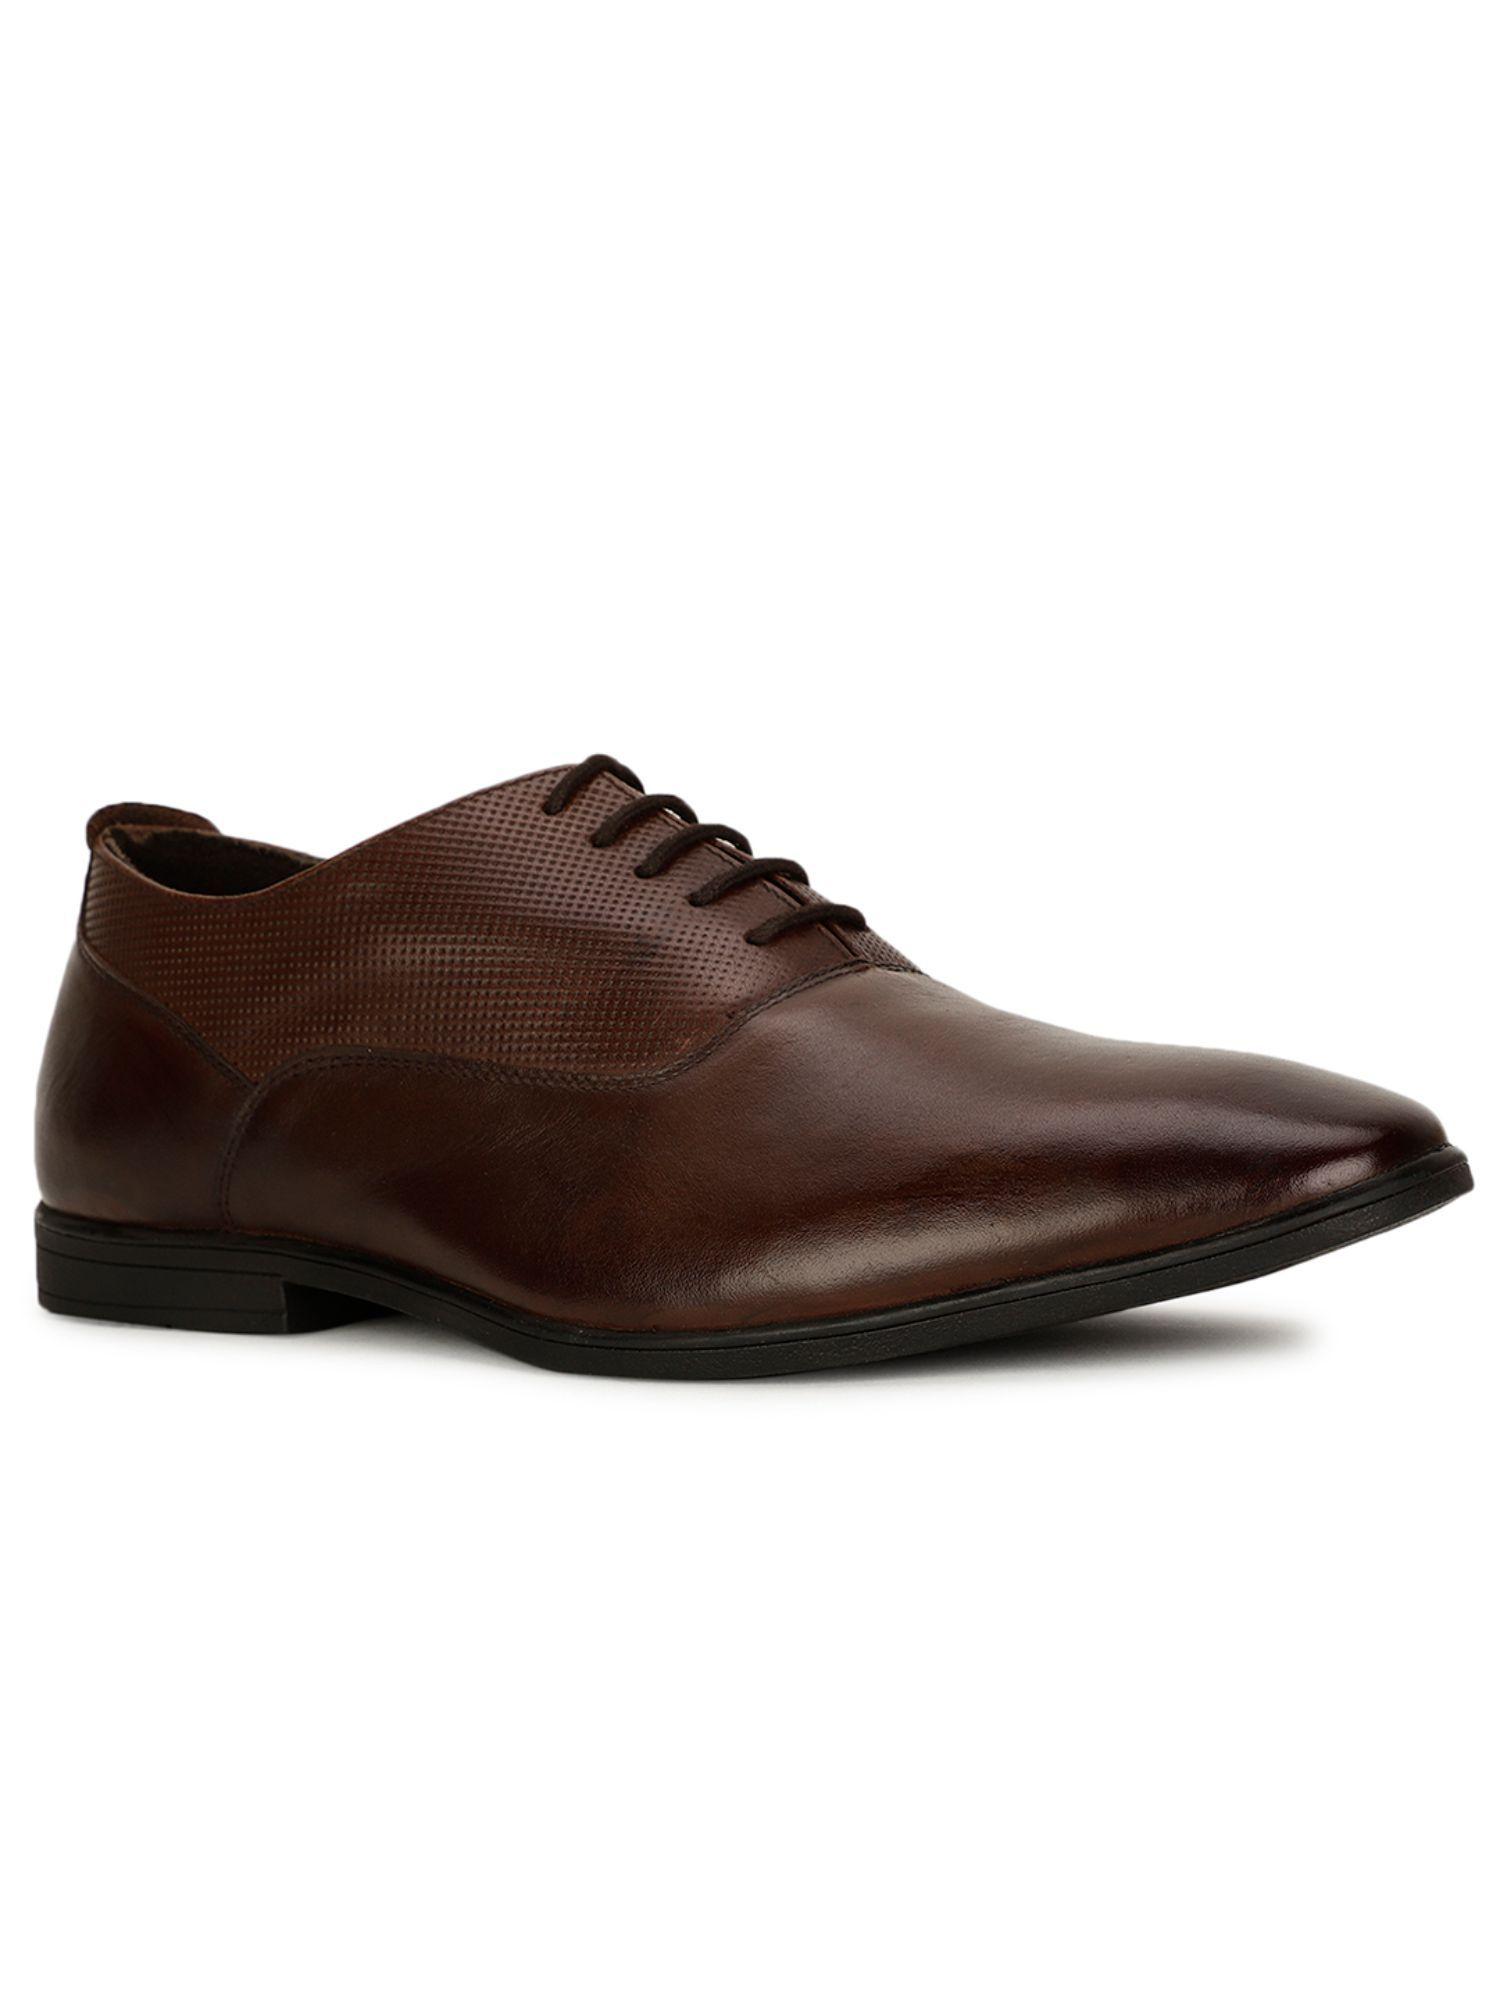 mens brown lace-ups formal oxfords